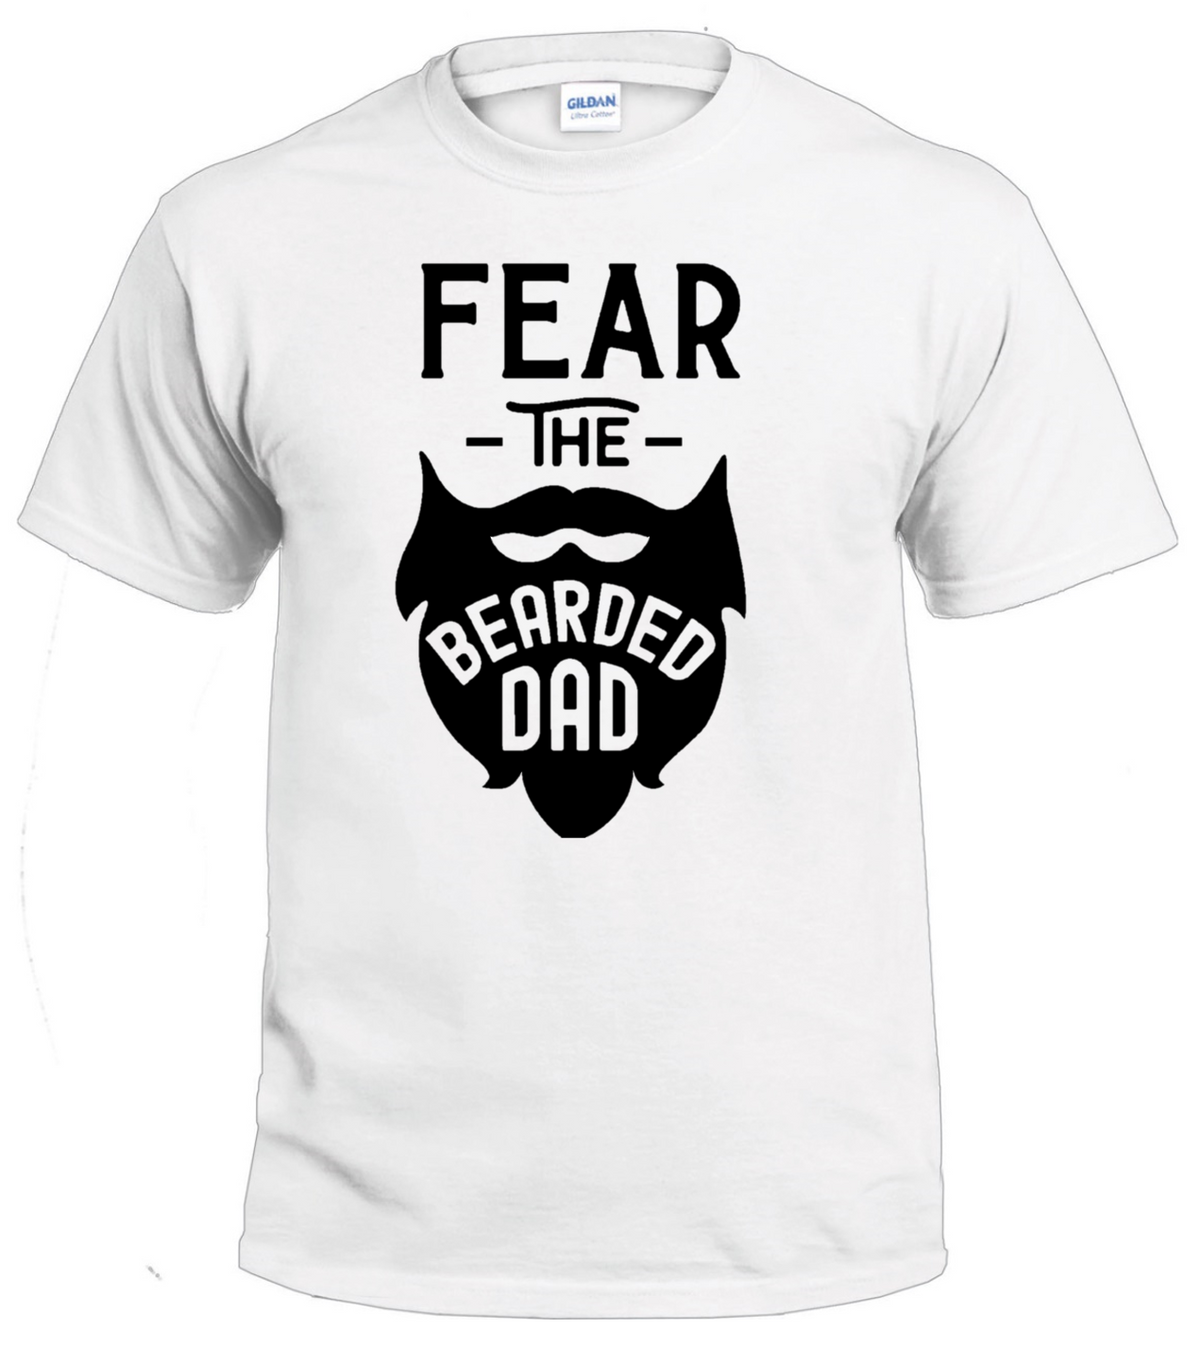 Fear The Bearded Dad t-shirt